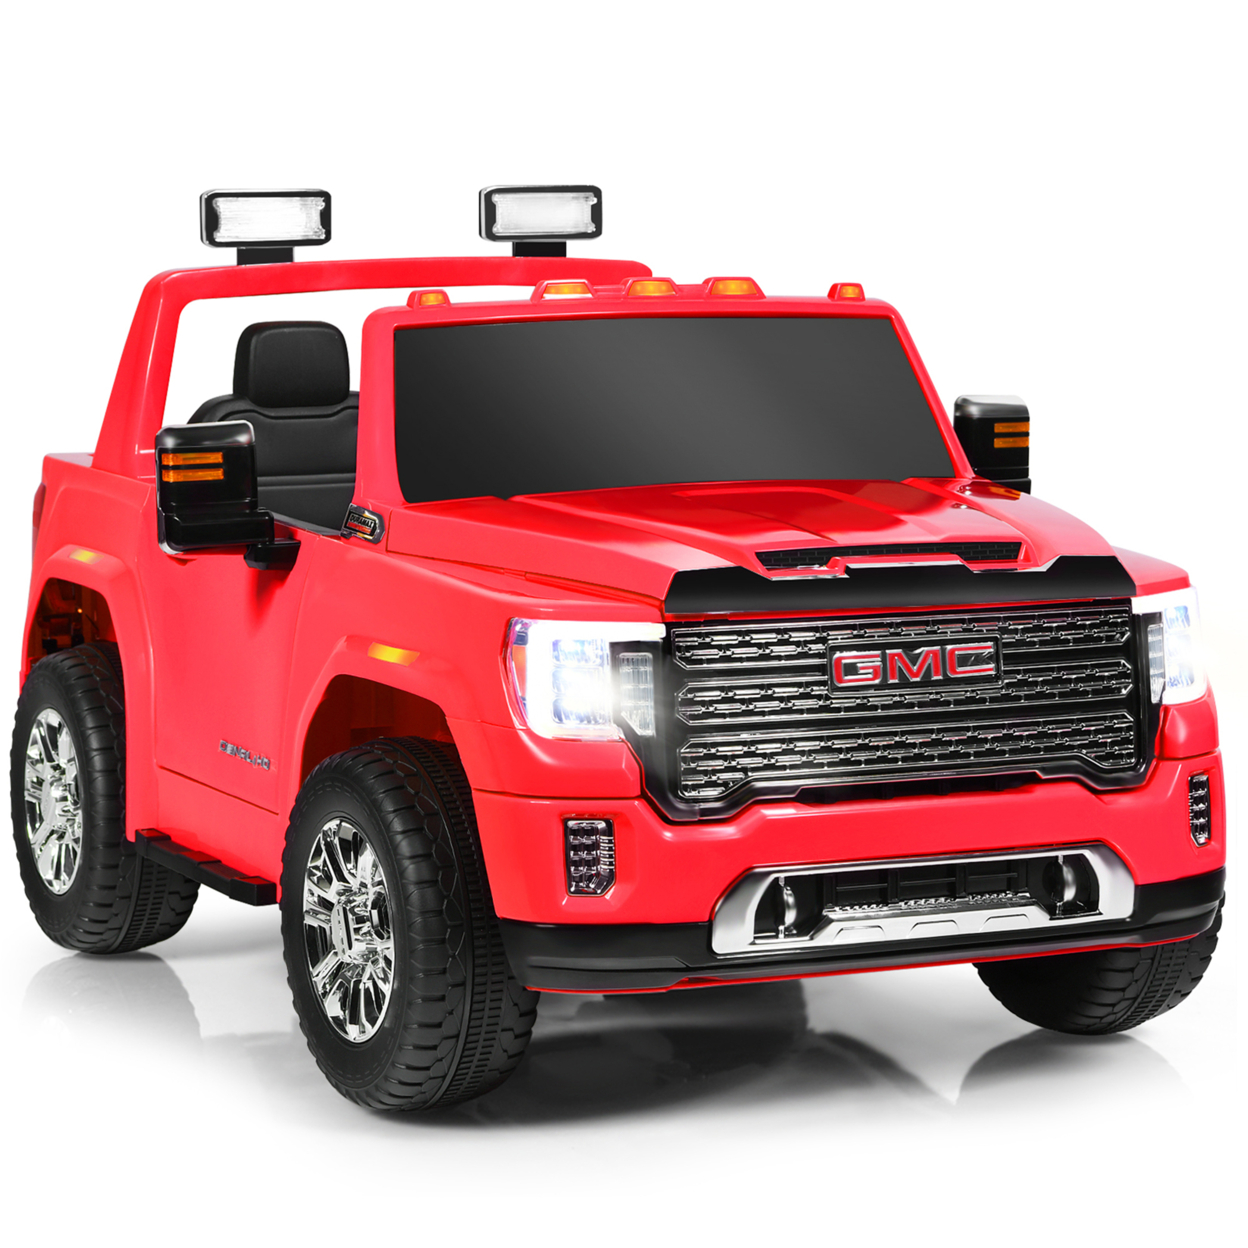 12V Licensed GMC Kids Ride On Car 2-Seater Truck W/ Remote Control - Red